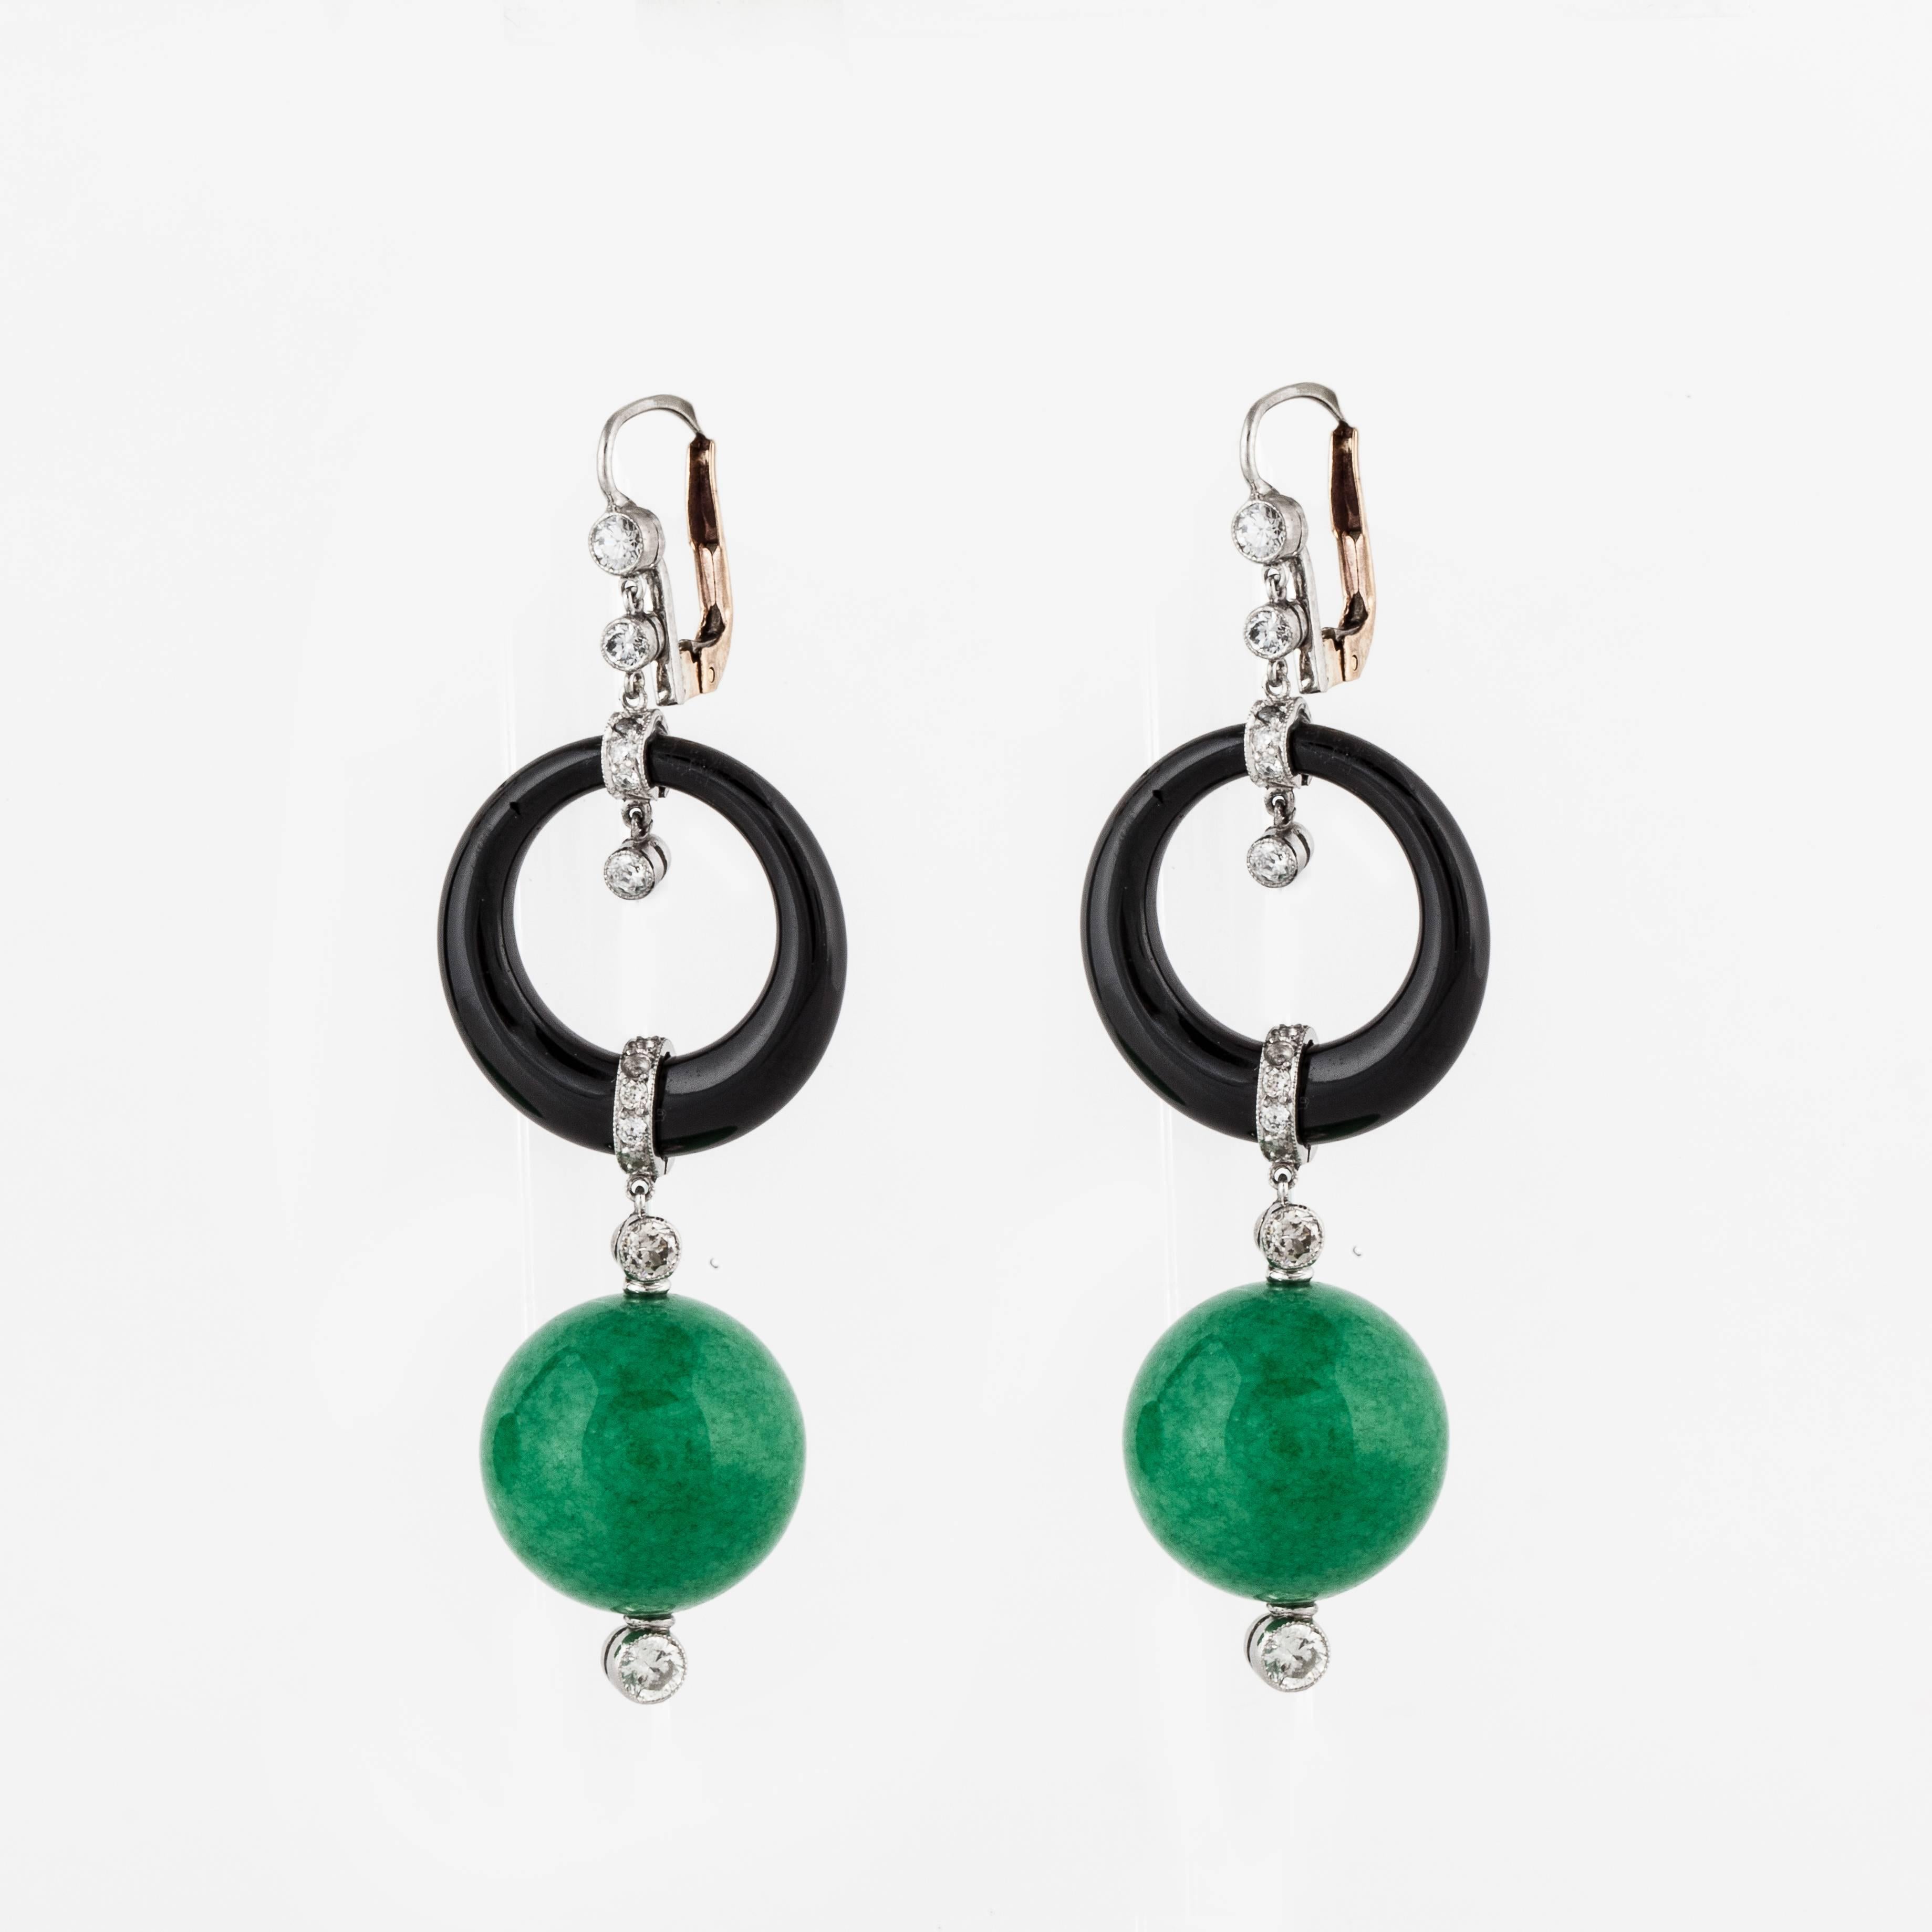 18K white gold drop dangle earrings composed of jade beads, onyx discs, and diamonds in platinum with 18K lever backs.  There are two jade beads that measure 16.1 mm each suspended from onyx discs. There are twenty-six round diamonds that total 1.10